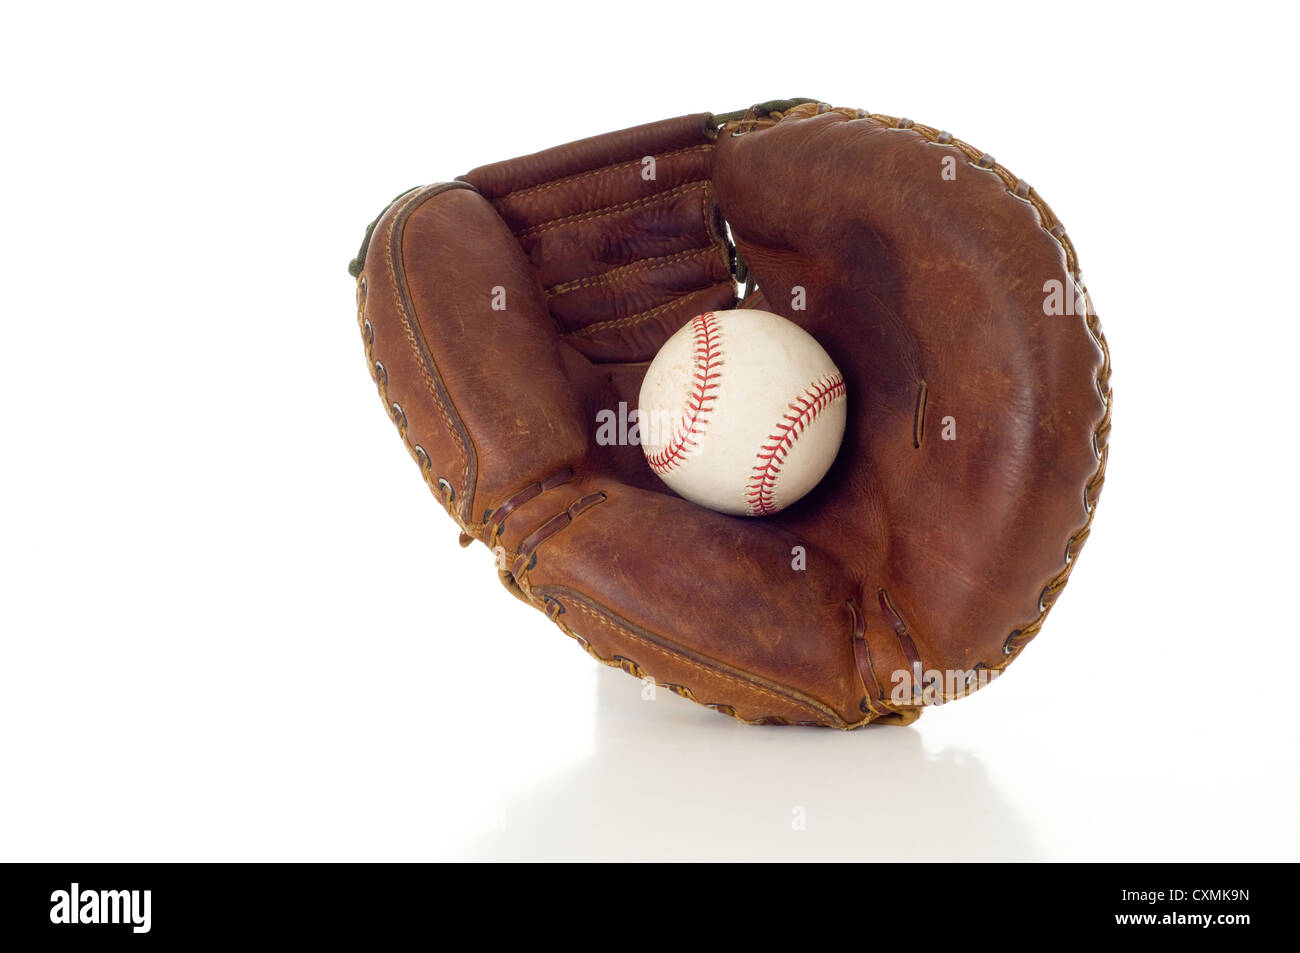 A brown leather baseball mitt with a white leather baseball on a white background with copy space Stock Photo